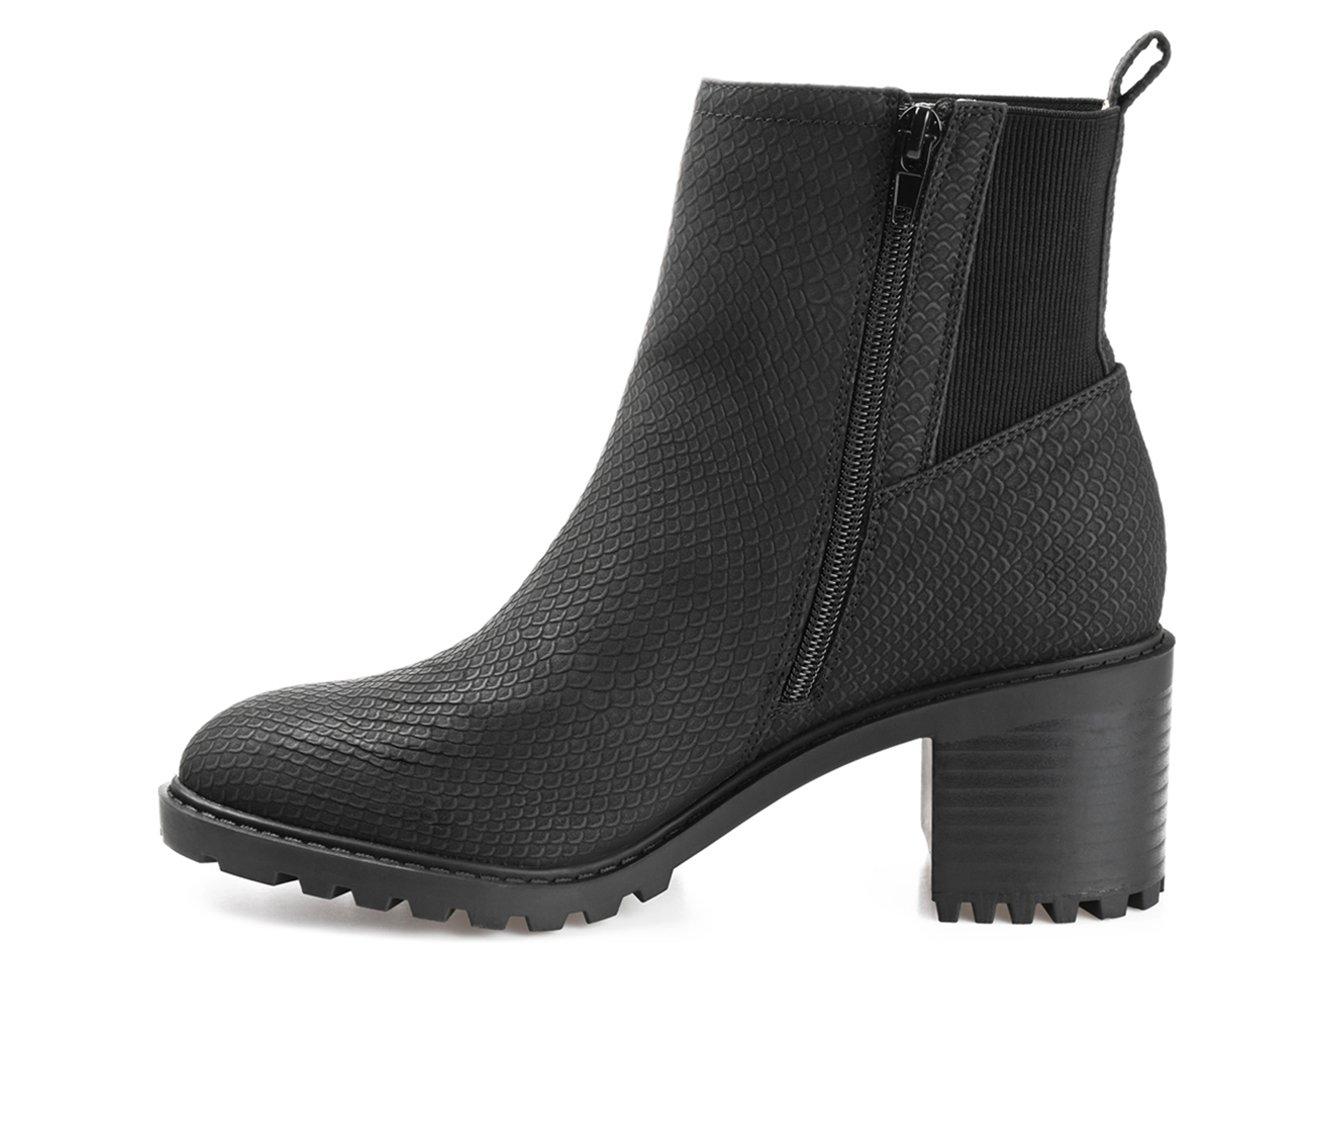 Women's Journee Collection Hallie Lugged Booties